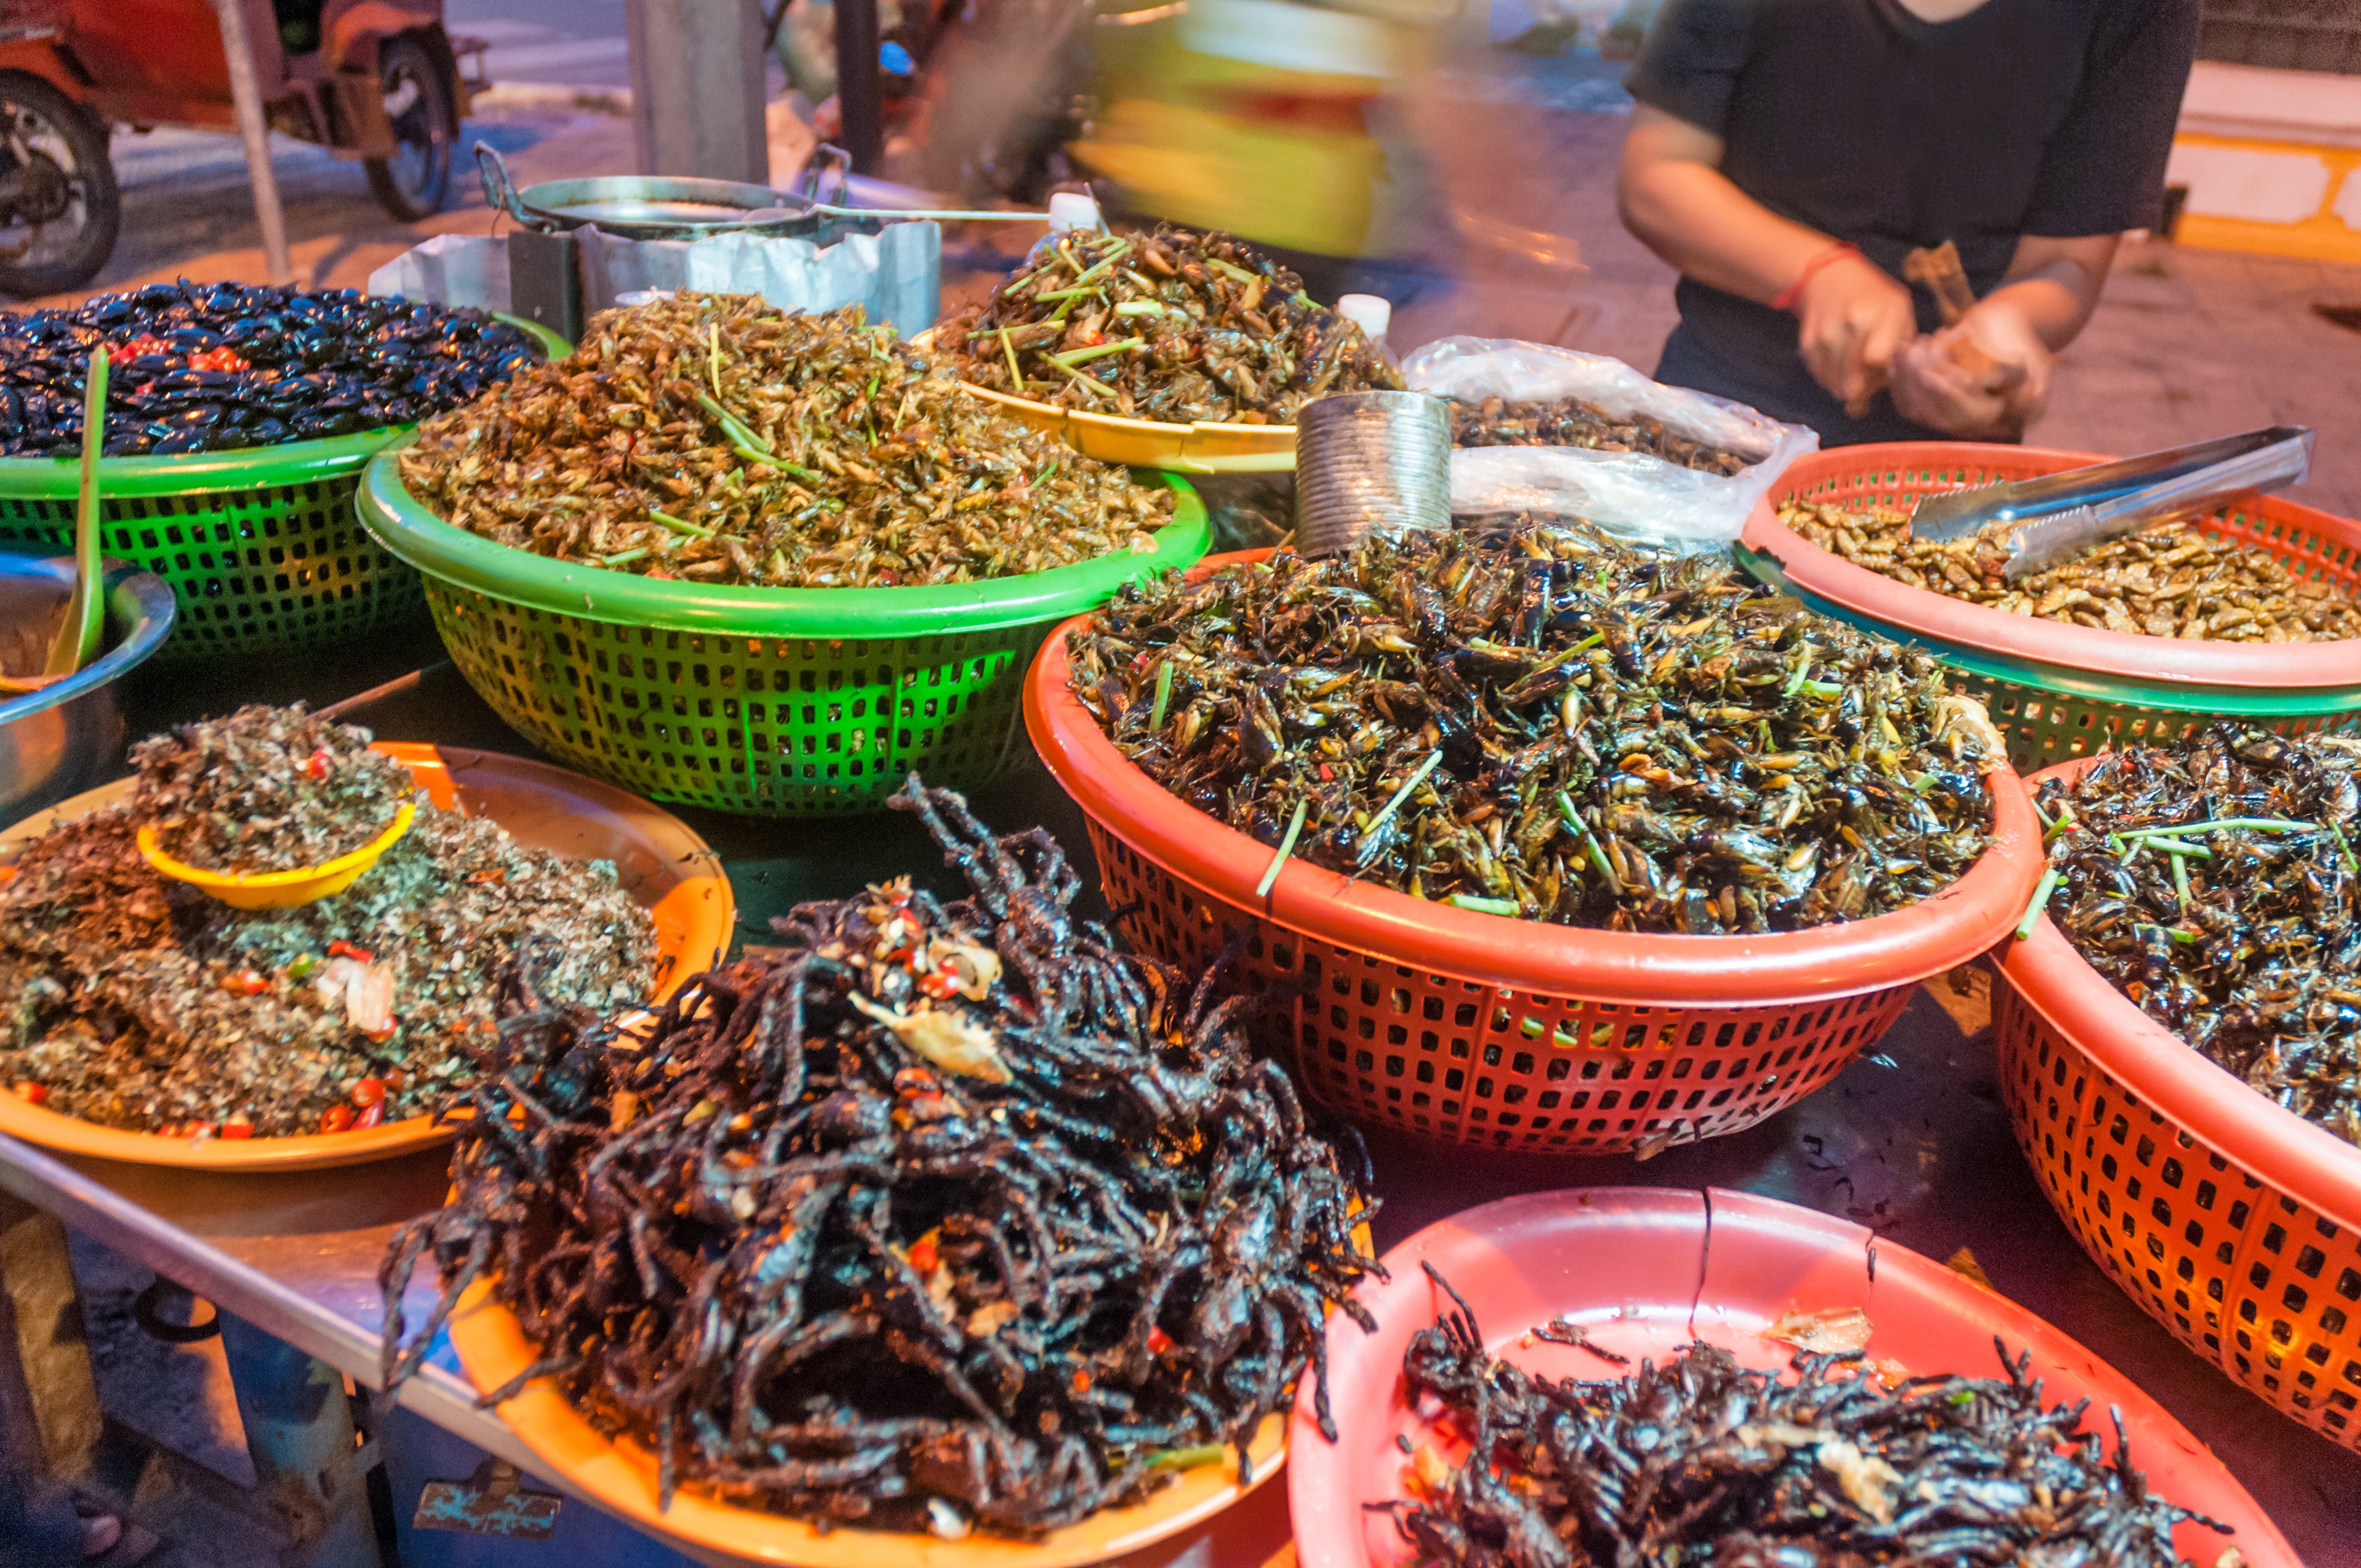 <p>Bugbear: edible insects for sale in Phnom Penh, Cambodia</p>